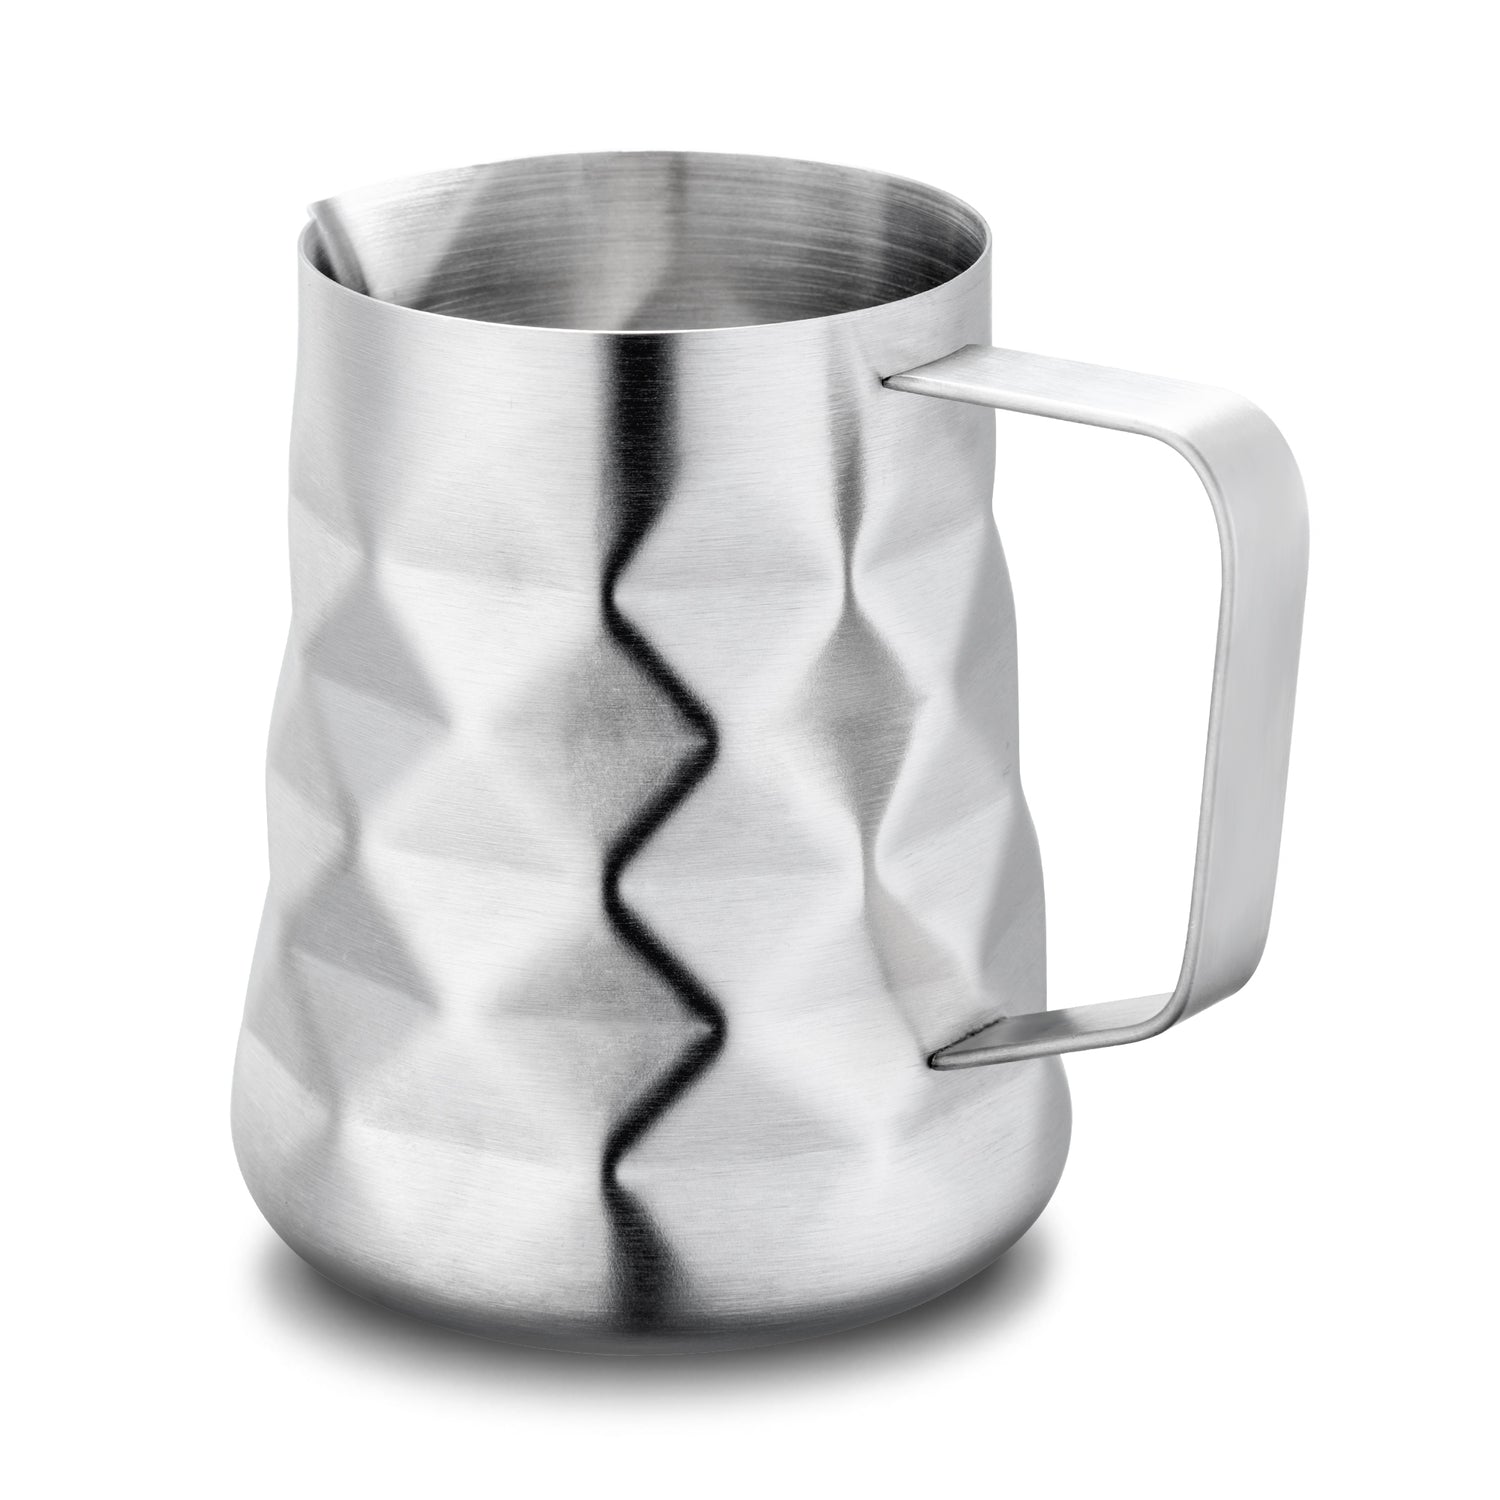 Stylish Coffee Frothing Pitcher In Diamond Pattern Prism Design 20 Ounce